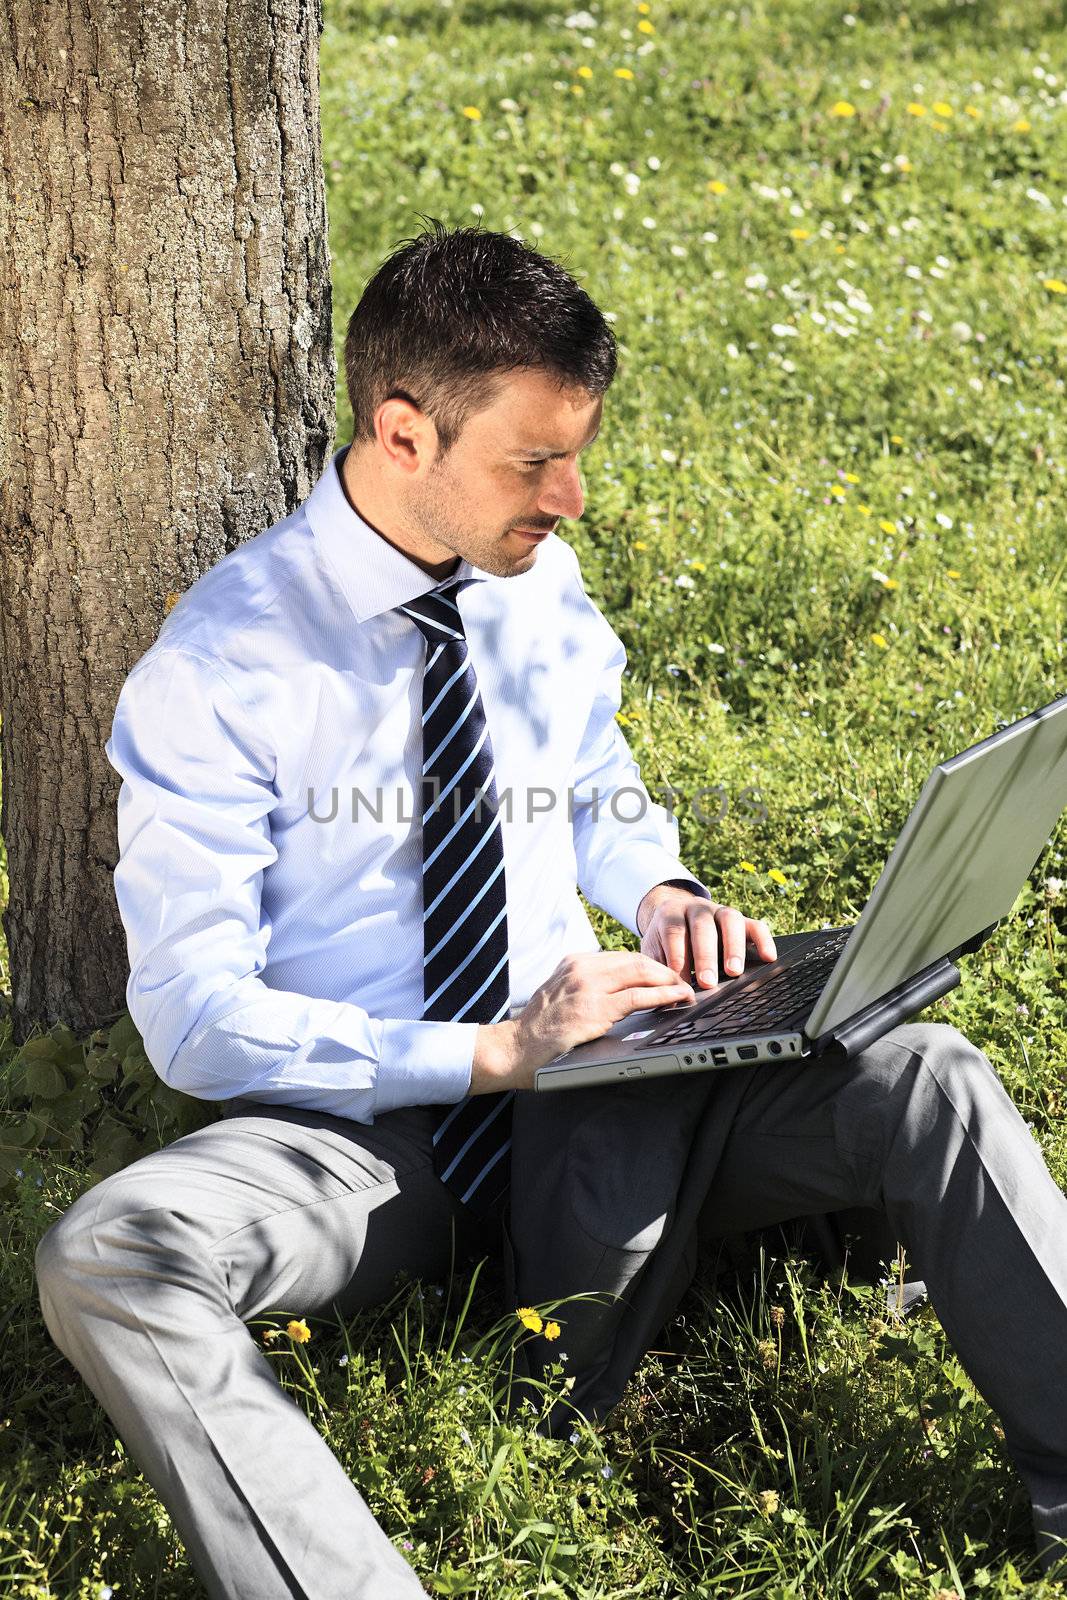 handsome businessman working on laptop in a park